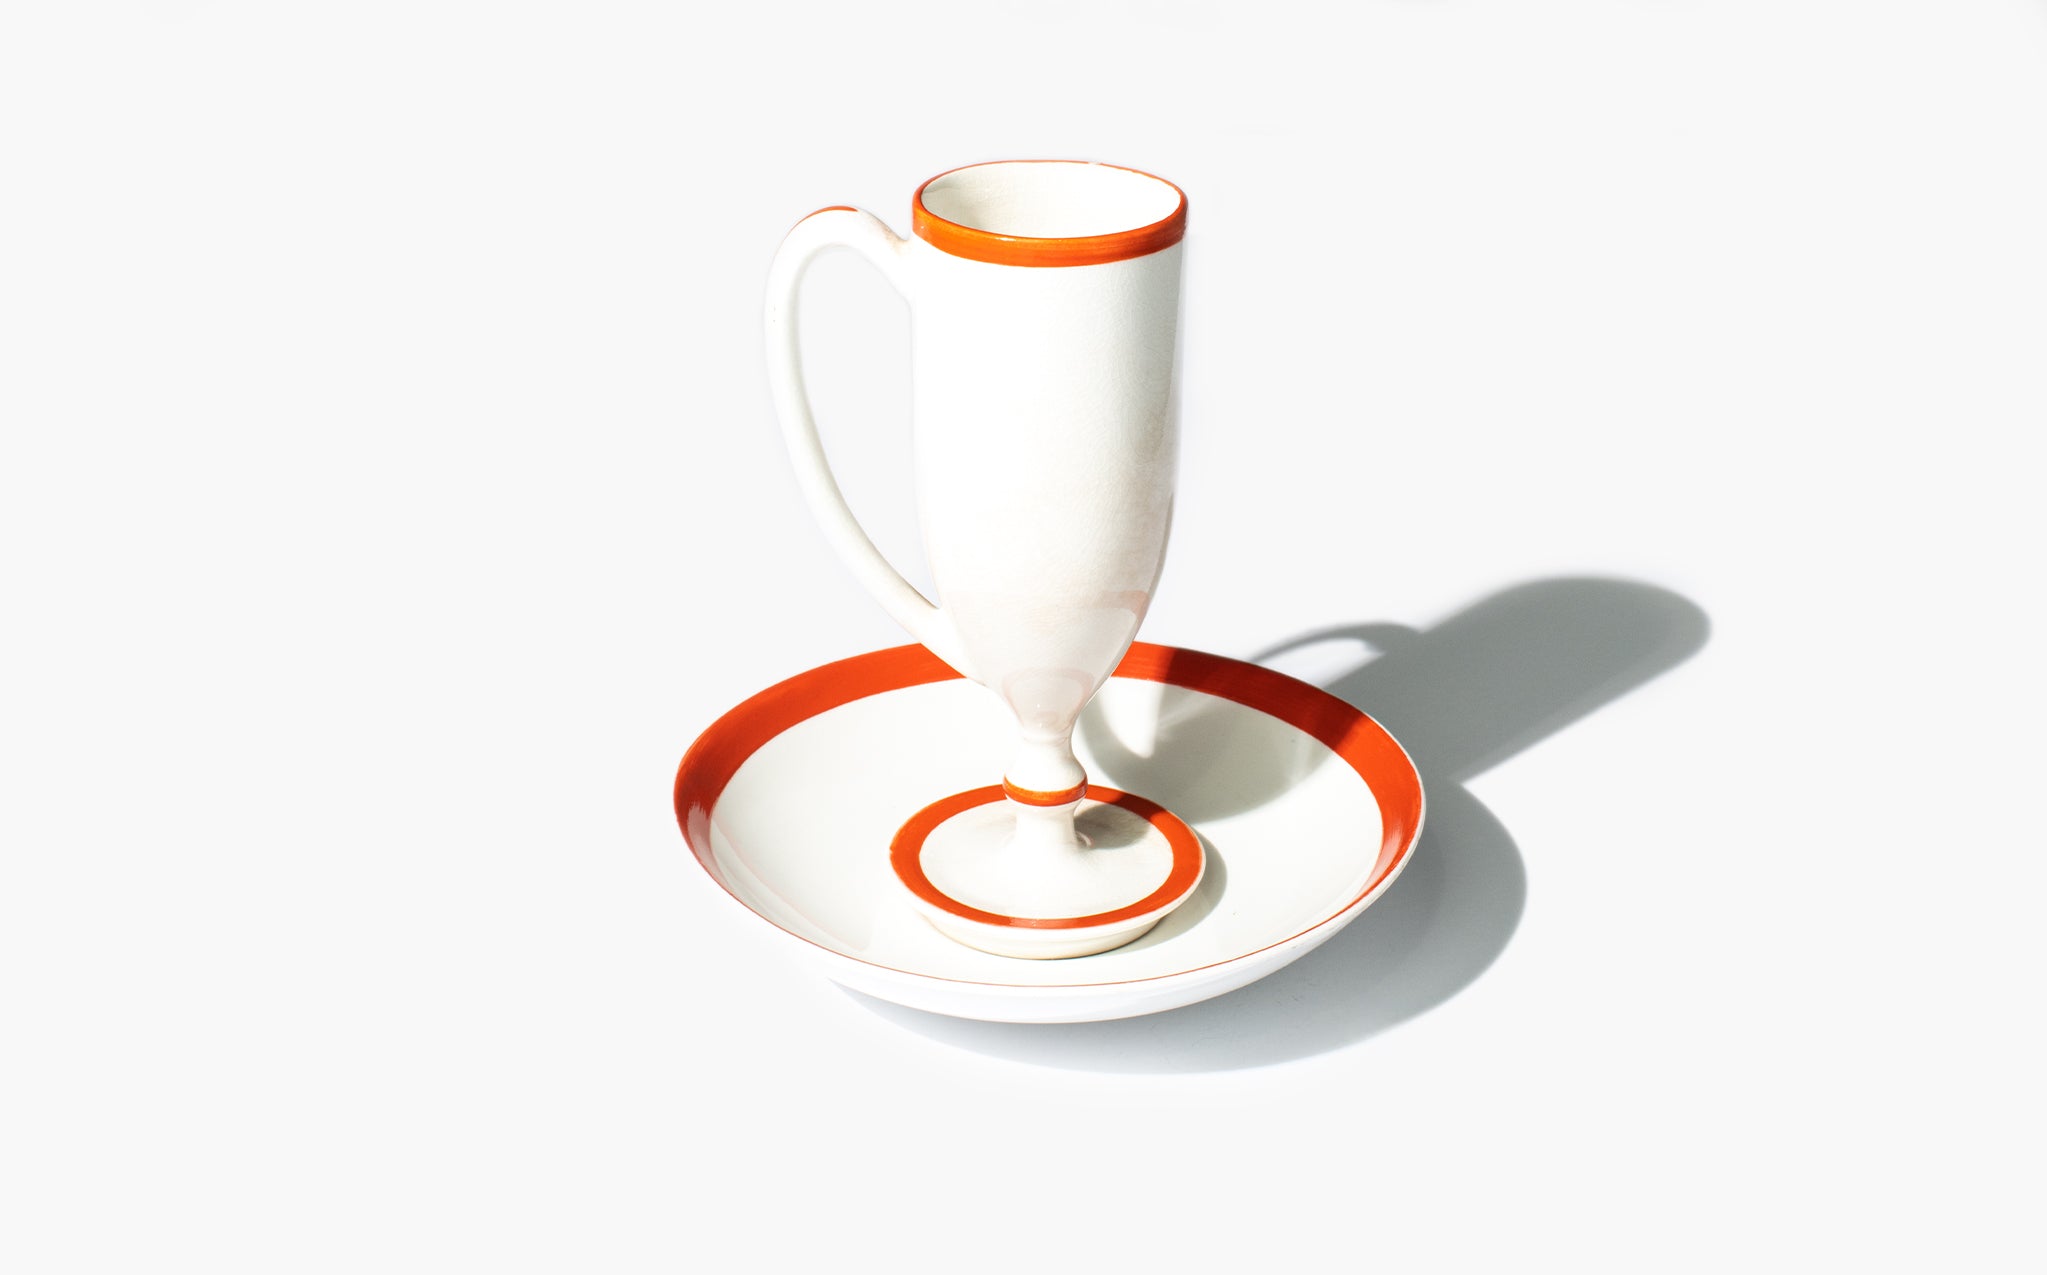 Mephistopheles Cup and Saucer